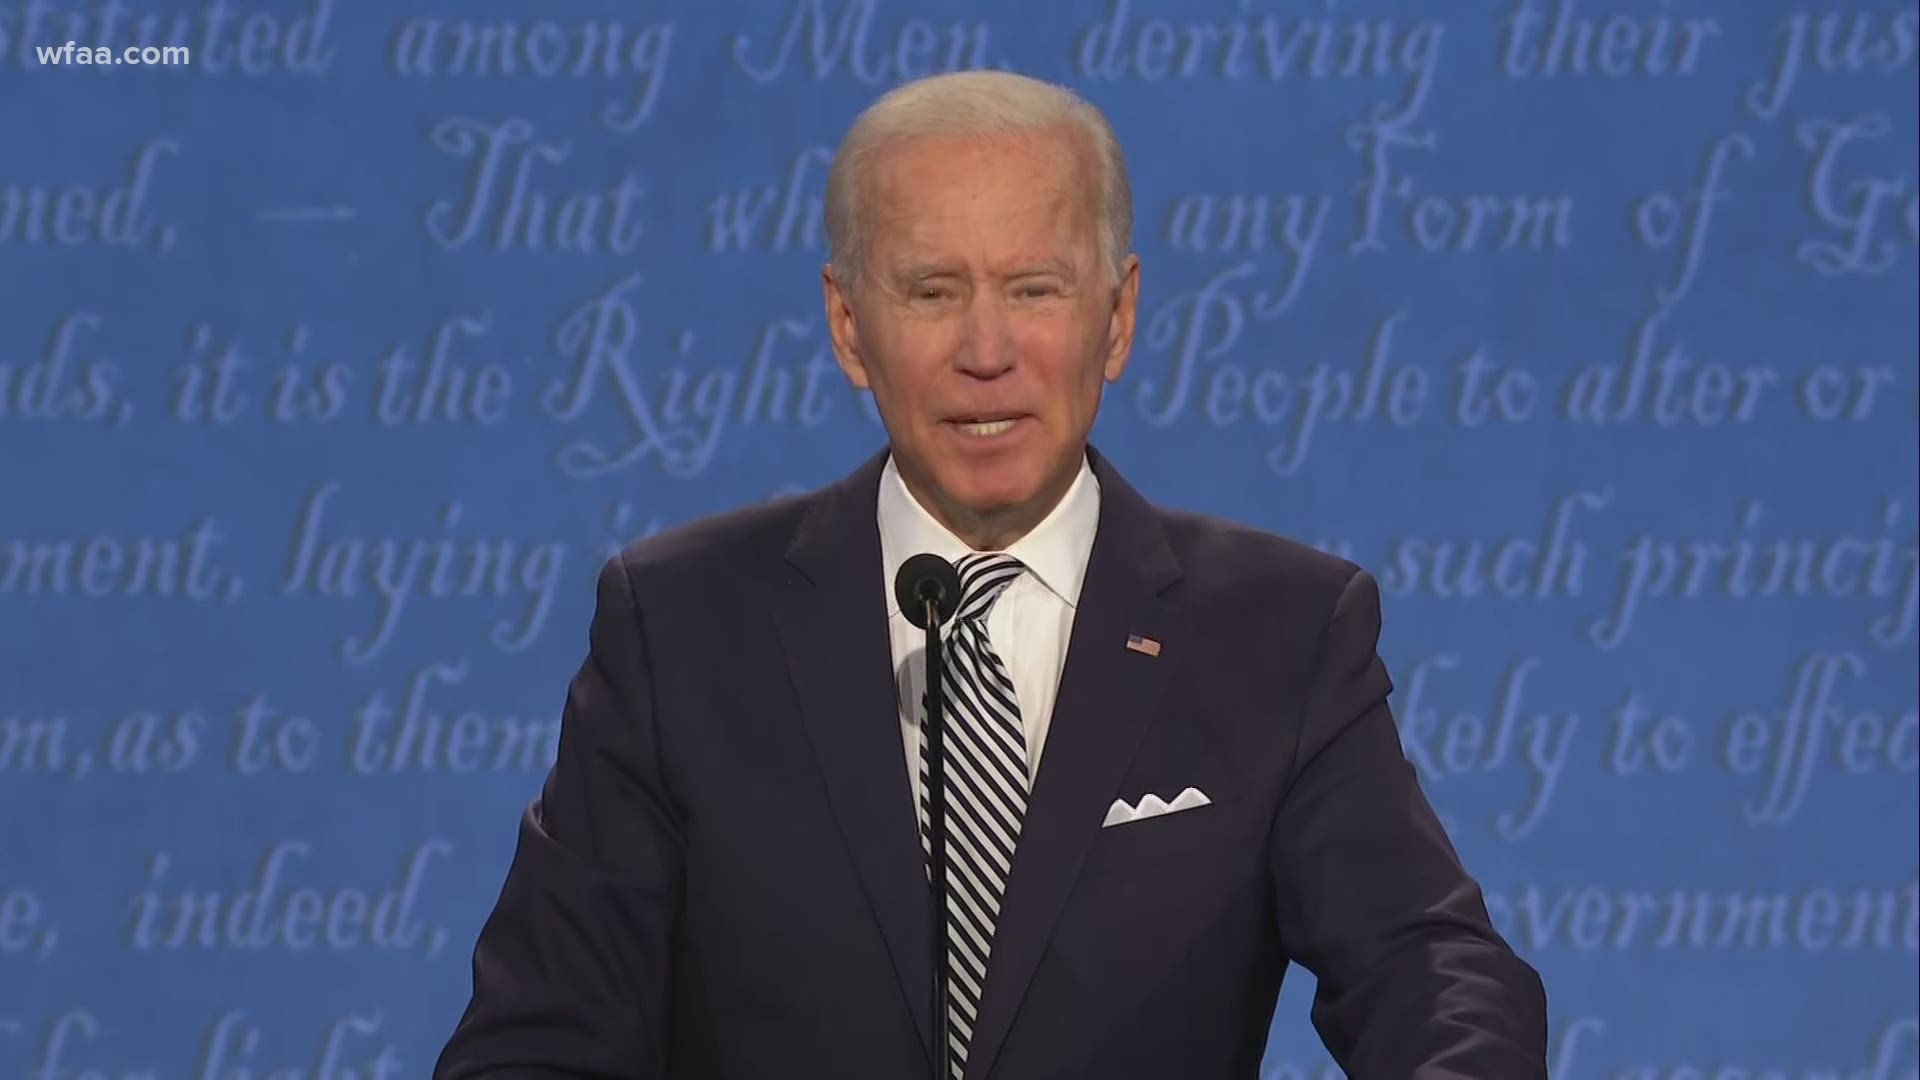 Joe Biden says the United States has become weaker, more violent and more divided since President Donald Trump was elected.